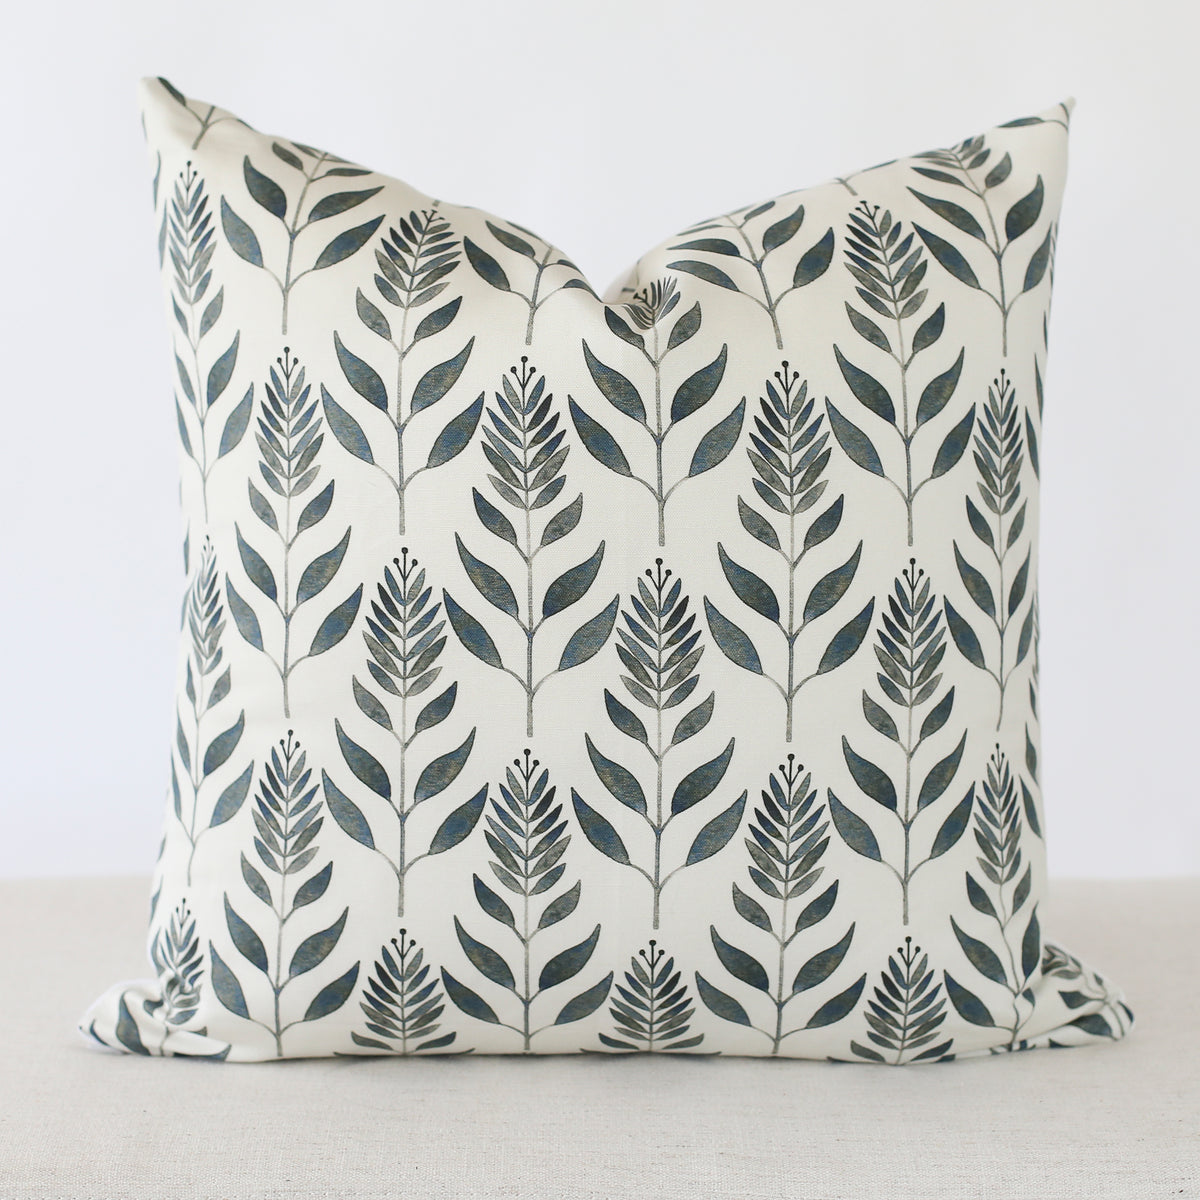 Green and Cream Botanical Print Pillow Covers